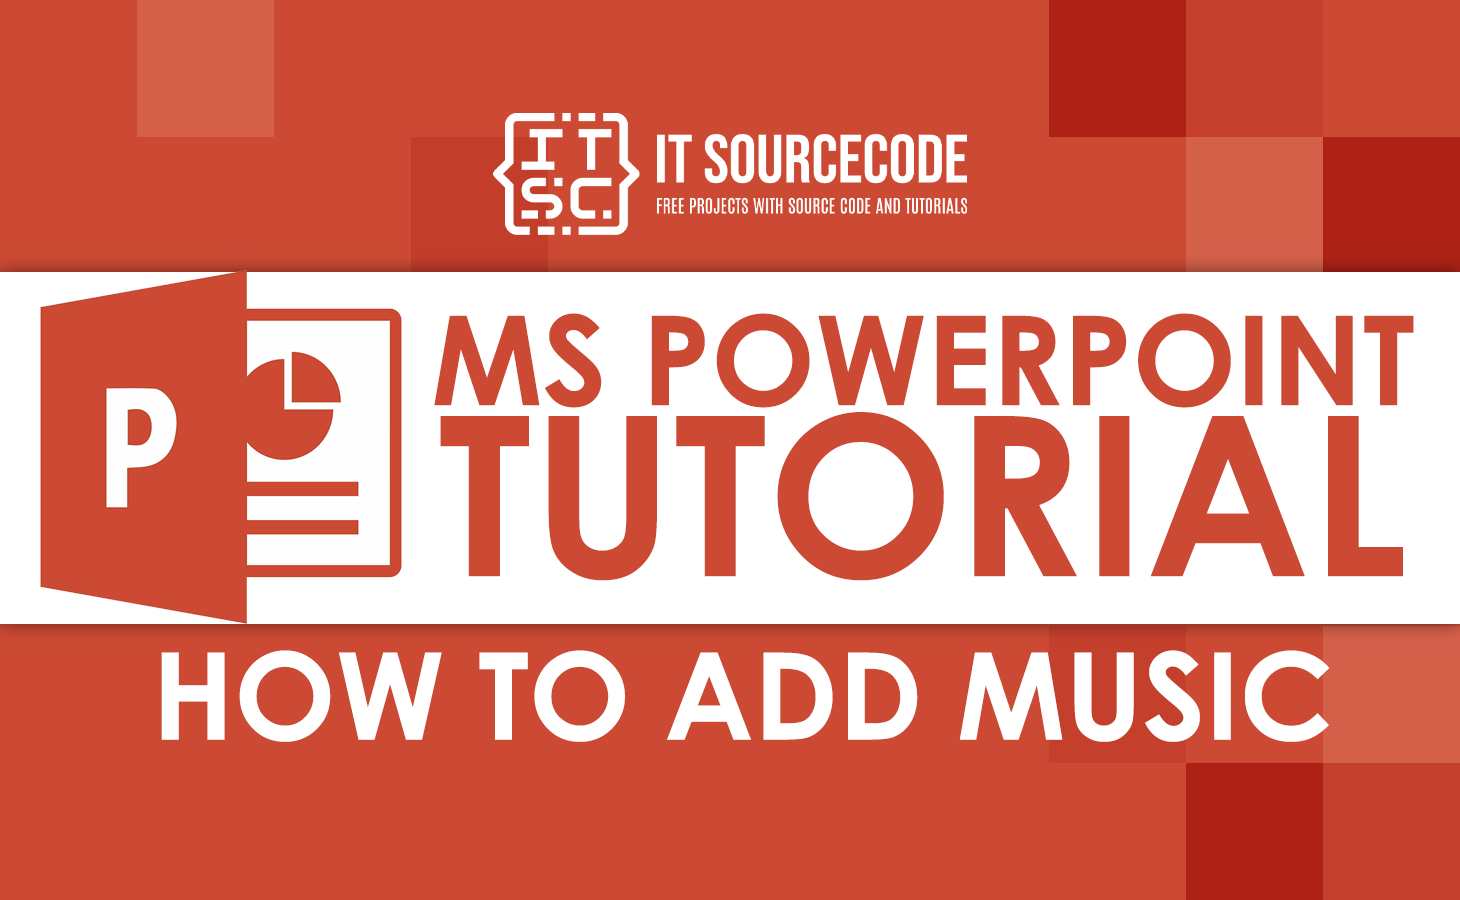 MS Powerpoint Tutorial how to add music